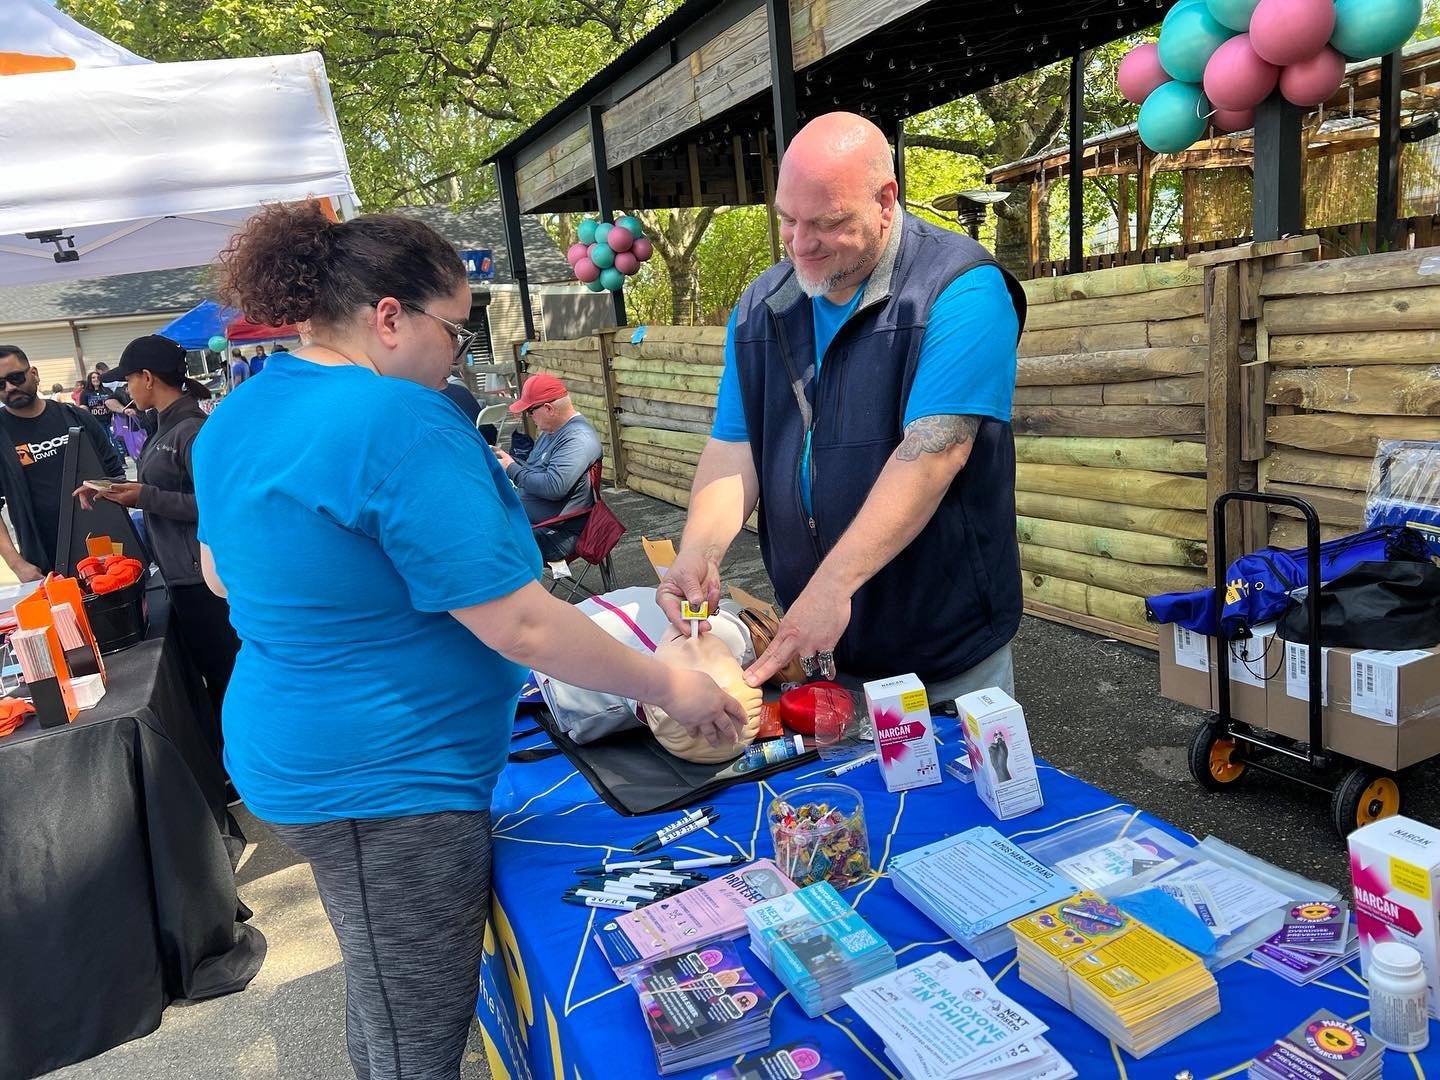 Harm Reduction and Health Educator Elvis Rosado represented SUPHR at the Latin X Visionaries Community Kick Off &amp; Resource Fair on Sunday, April 28. Our Harm Reduction and Community Engagement teams attend events throughout the year to distribute